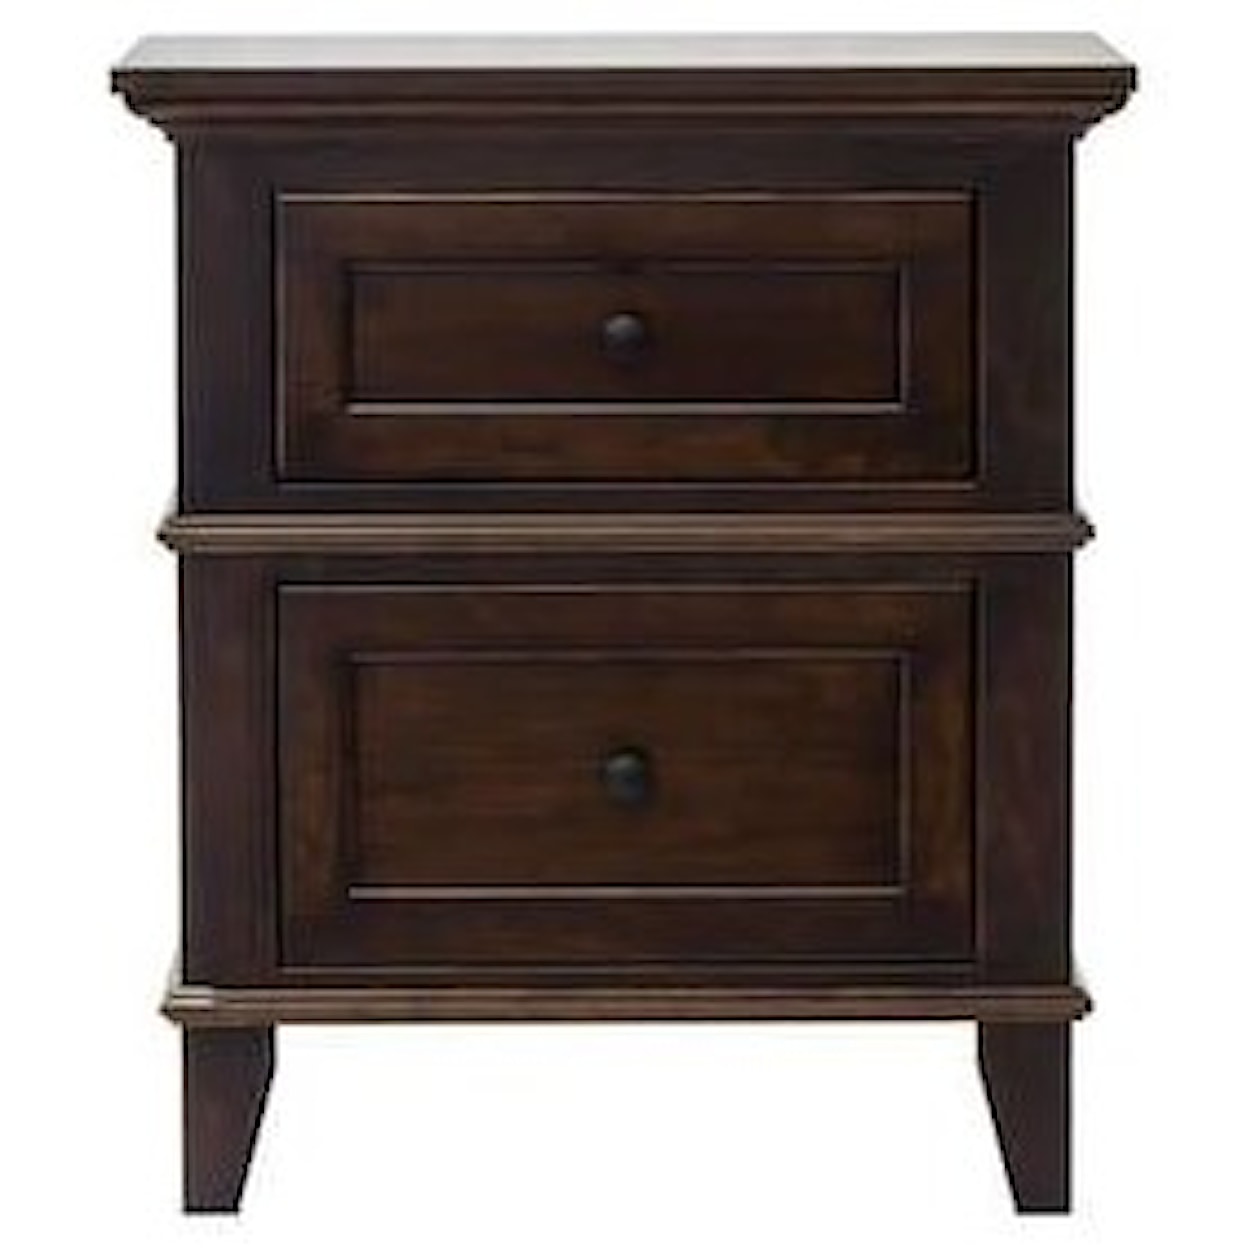 L.J. Gascho Furniture Brentwood Brentwood Nightstand